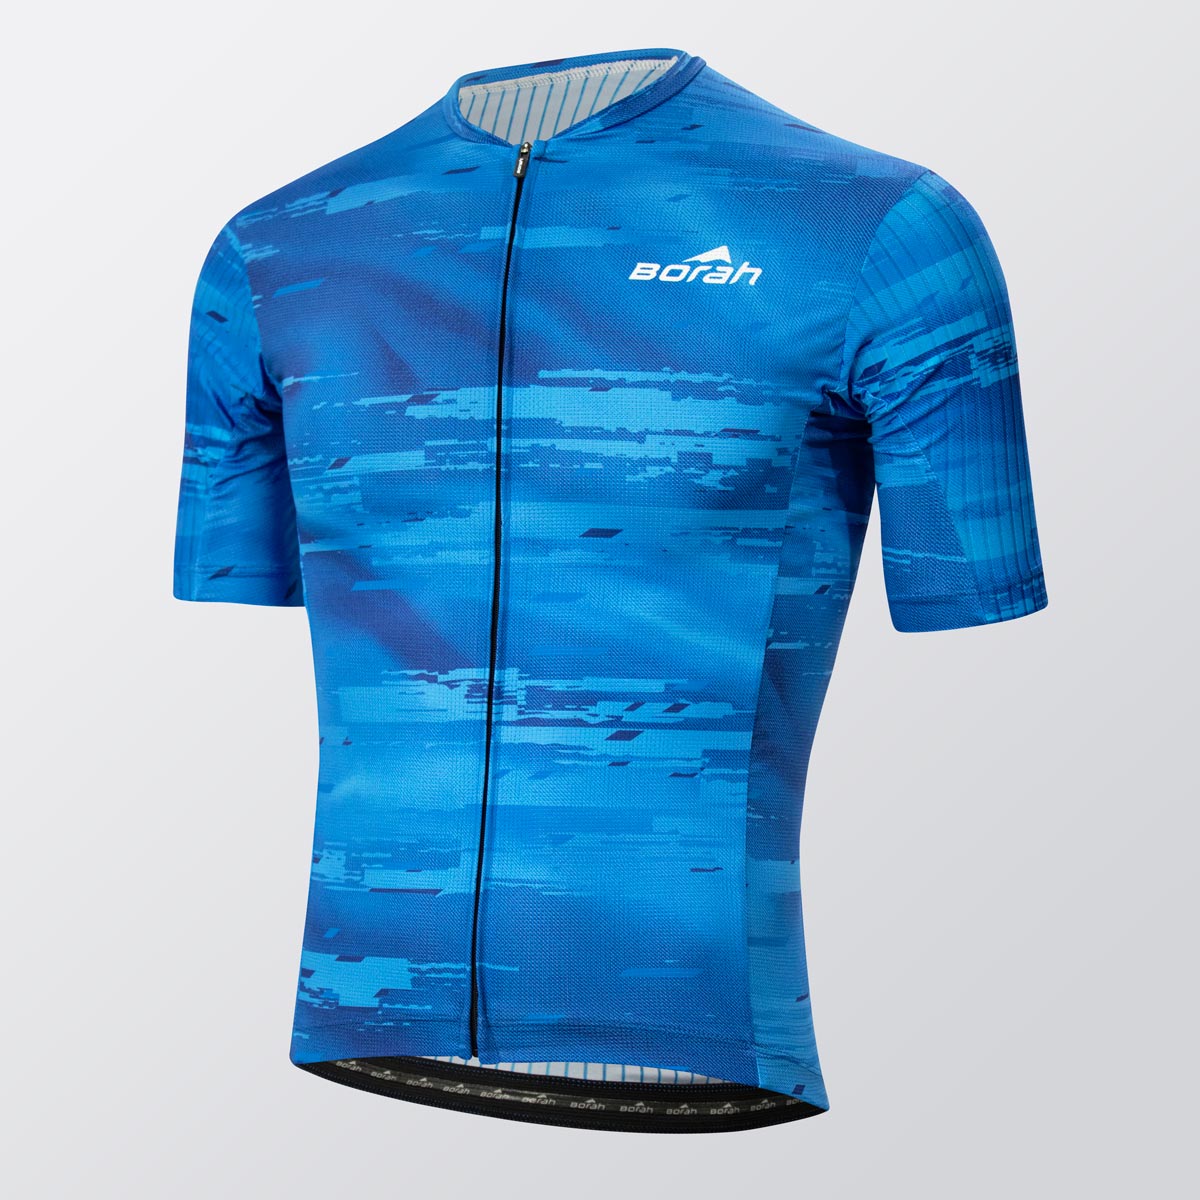 Men's OTW Spark Cycling Jersey front view.